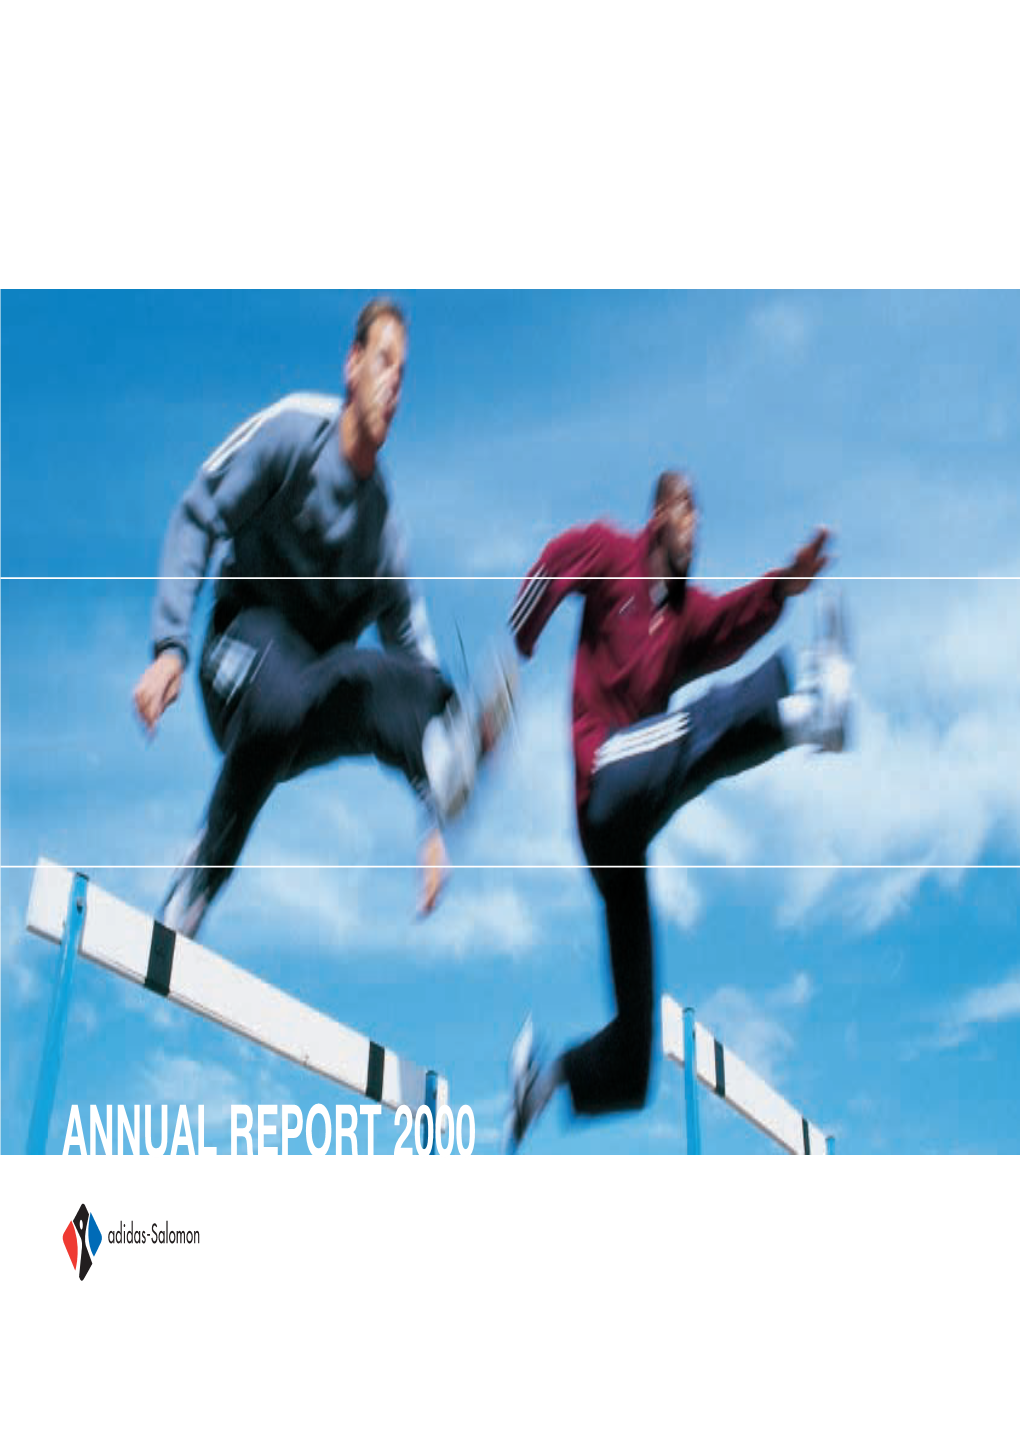 ANNUAL REPORT 2000 New Management: Our Mission and Goals Pages 2, 8